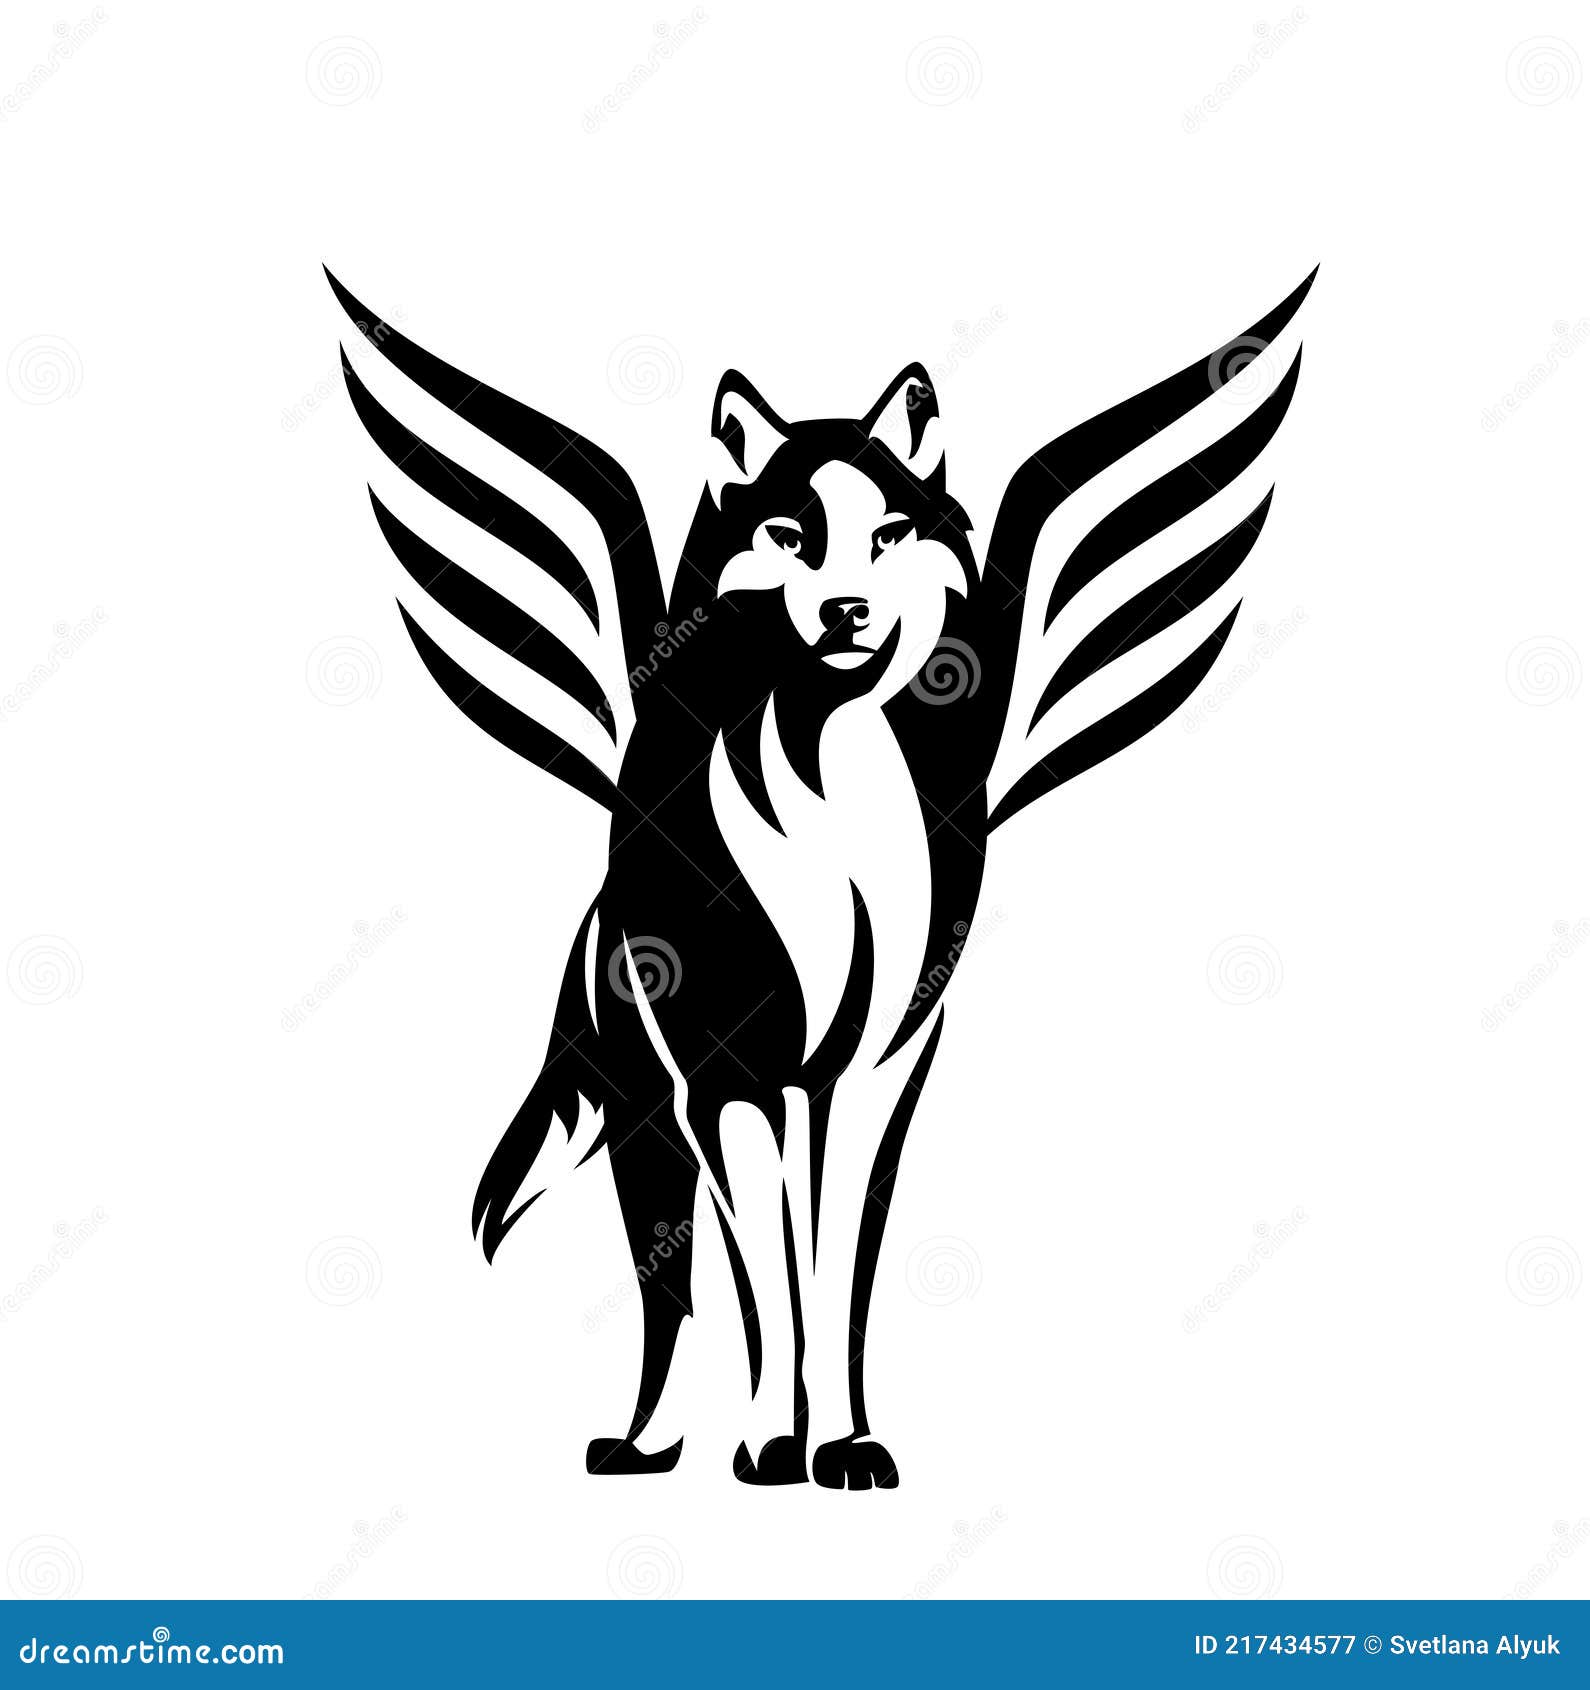 winged wolves - Google Search | Cute animal drawings, Animal drawings,  Mythical creatures art